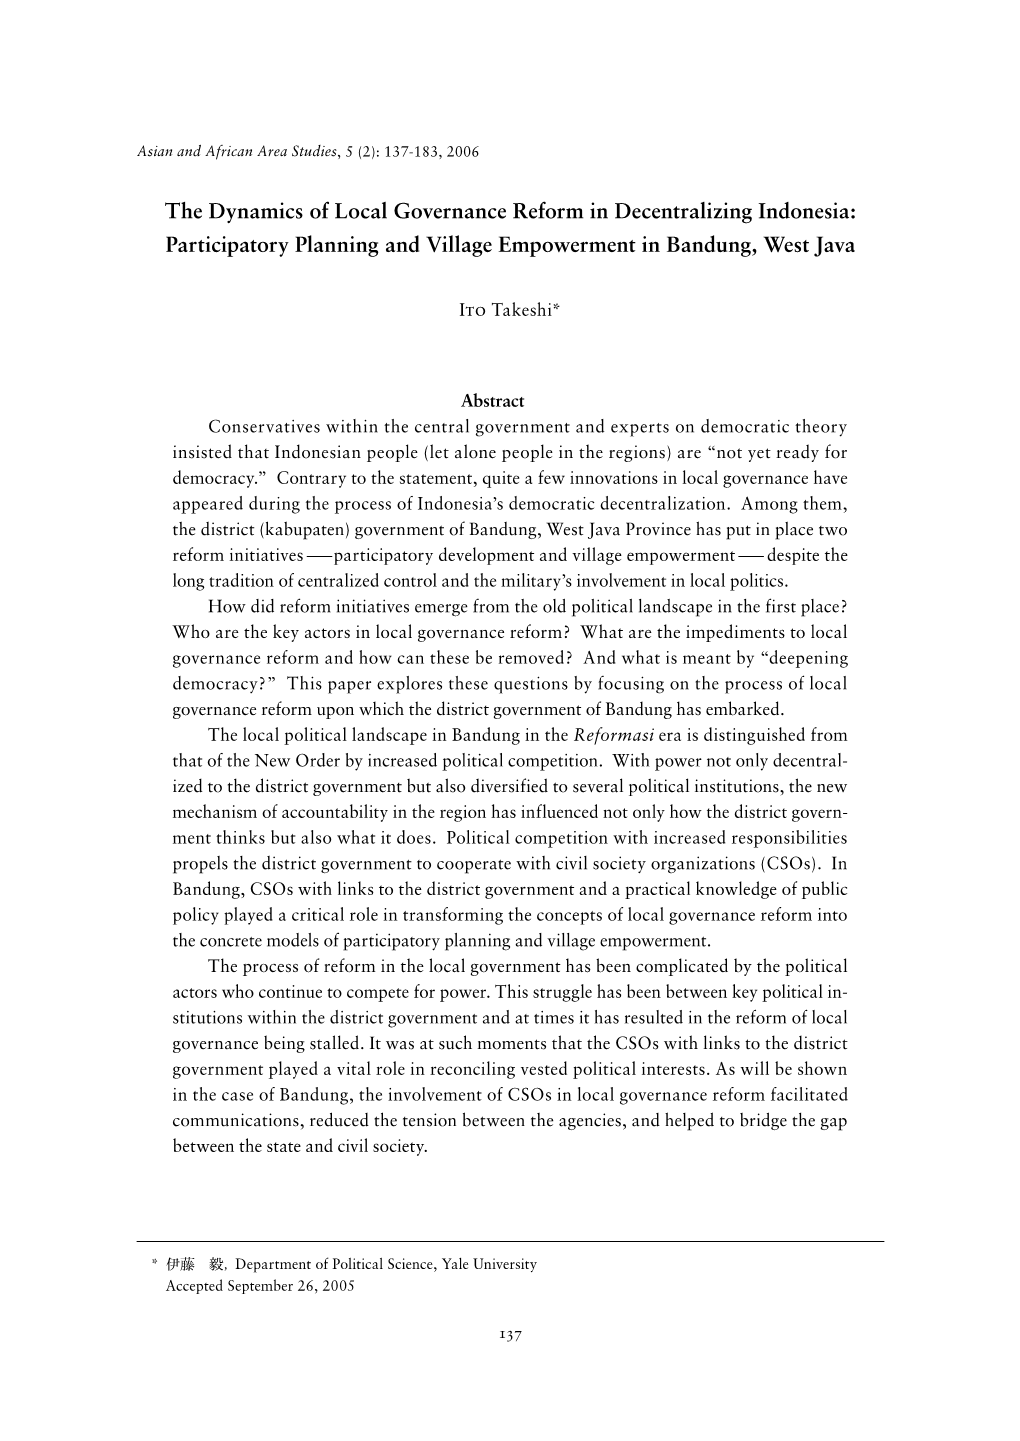 The Dynamics of Local Governance Reform in Decentralizing Indonesia: Participatory Planning and Village Empowerment in Bandung, West Java